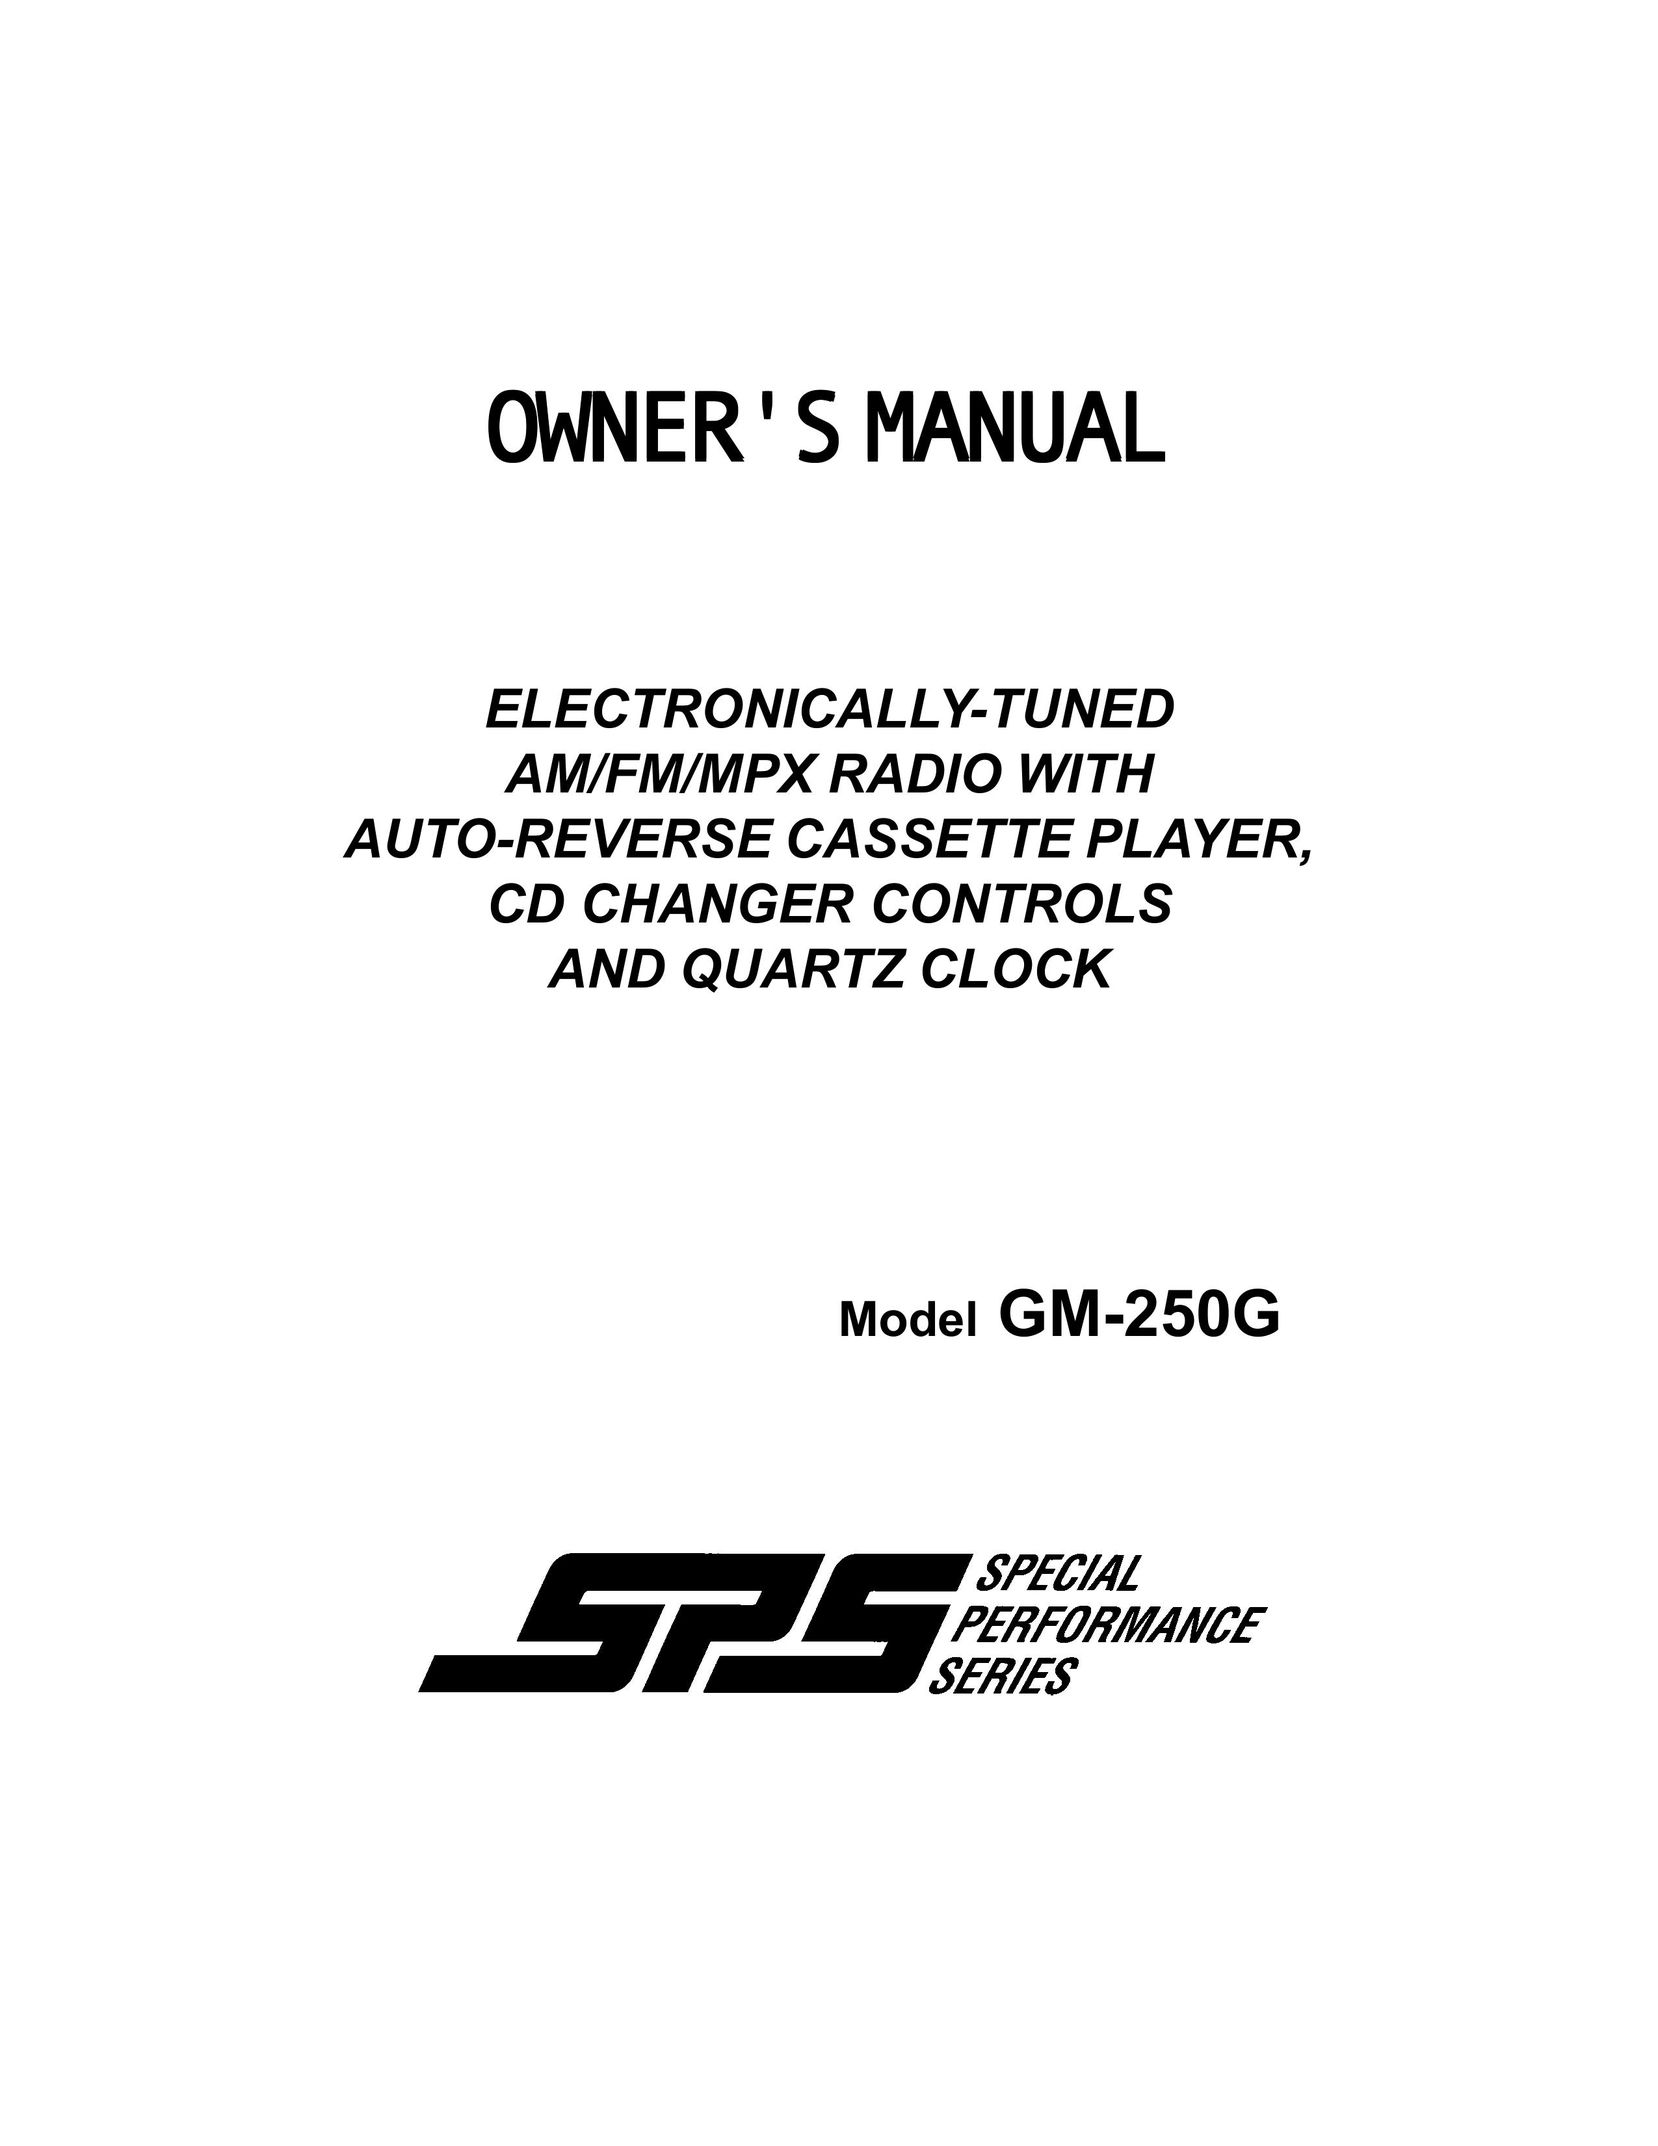 Audiovox GM-250G Car Stereo System User Manual